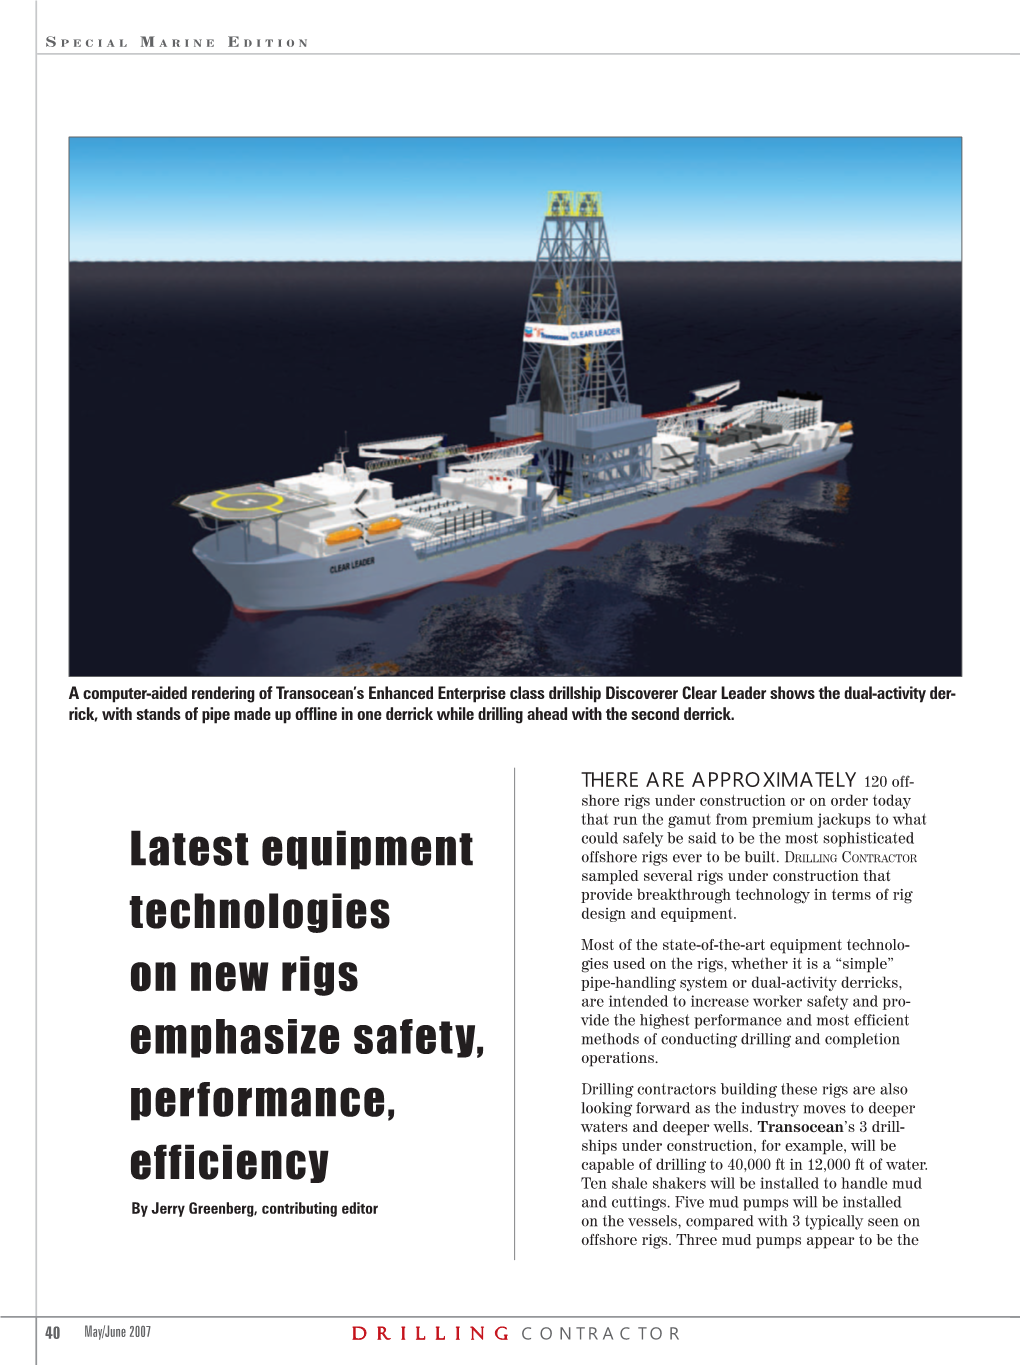 Latest Equipment Technologies on New Rigs Emphasize Safety